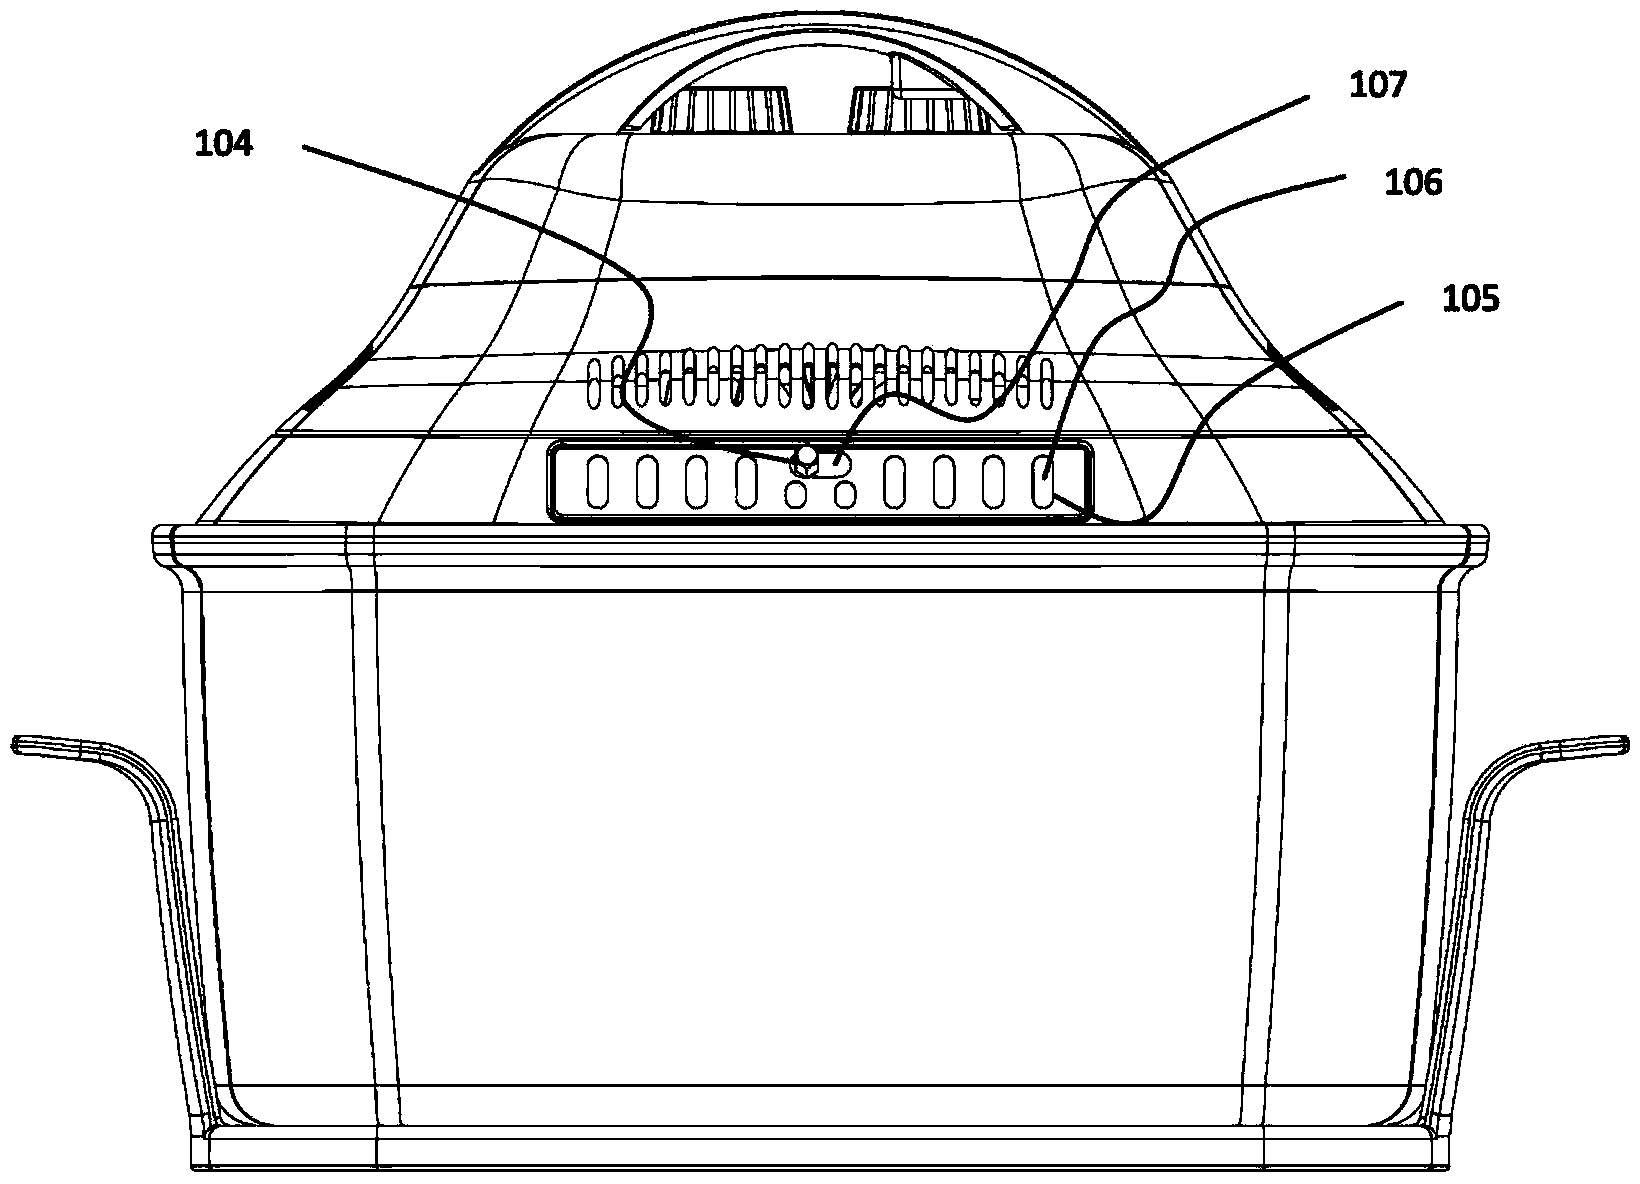 Adjustable exhaust device for light wave oven